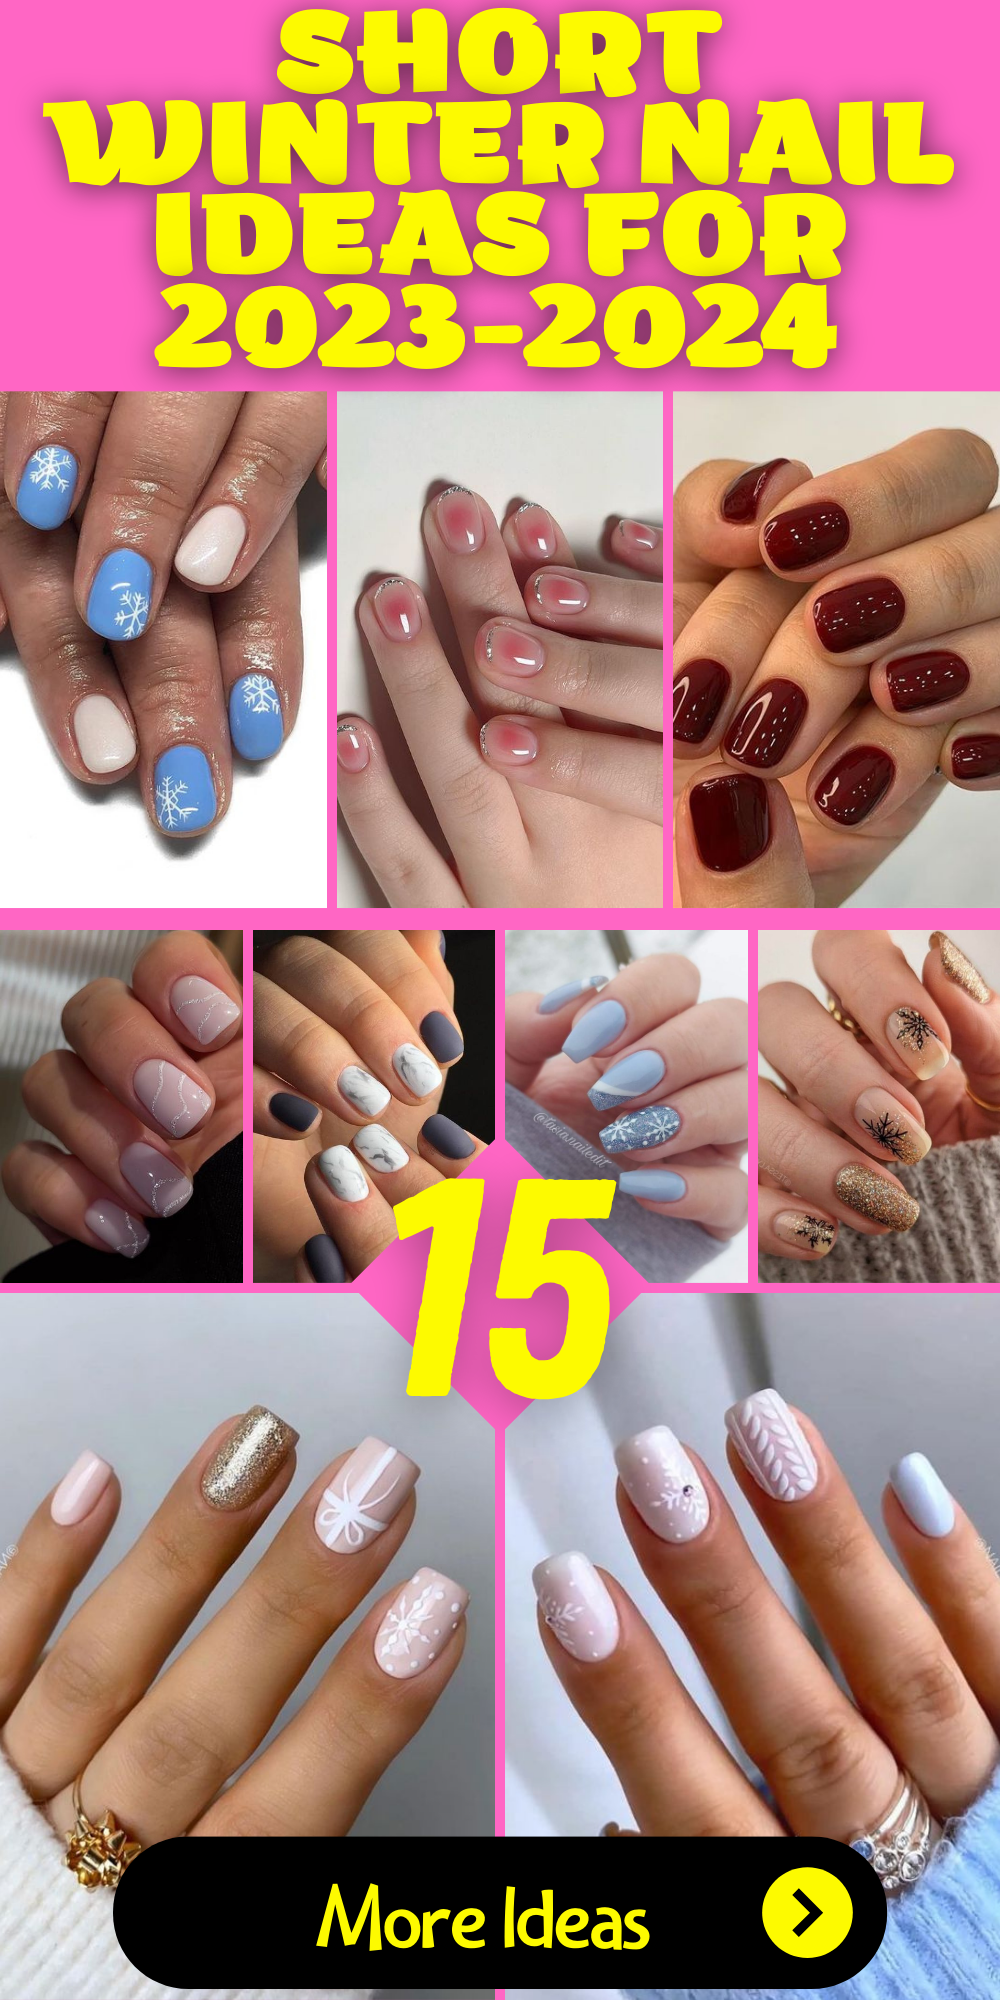 15 Short Winter Nail Ideas for 2023-2024 - thepinkgoose.com